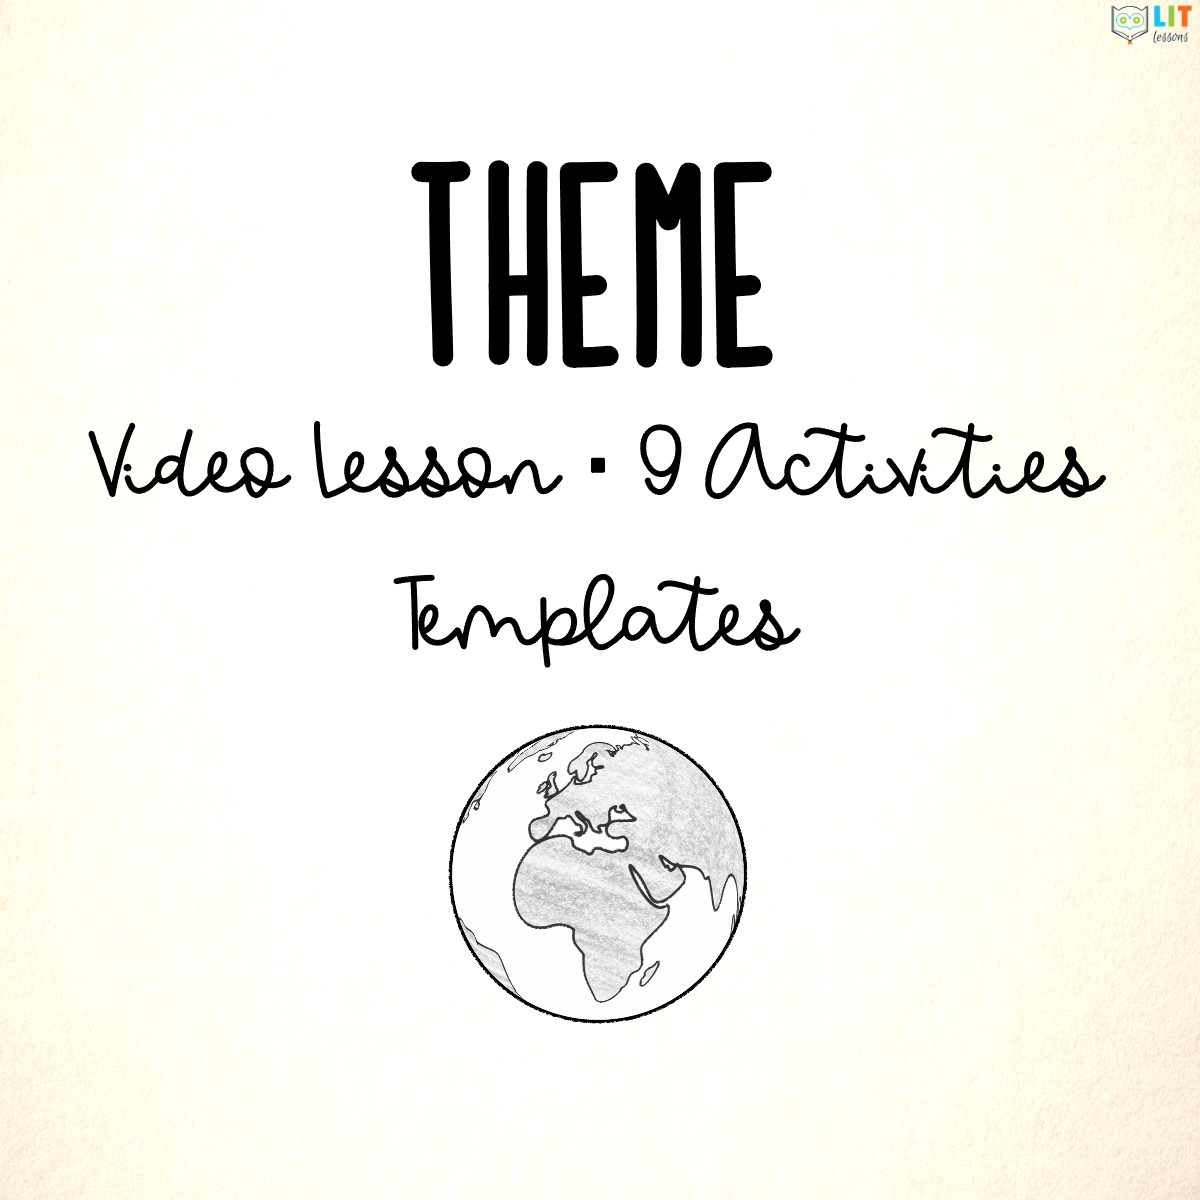 Theme Activities & Video Lesson